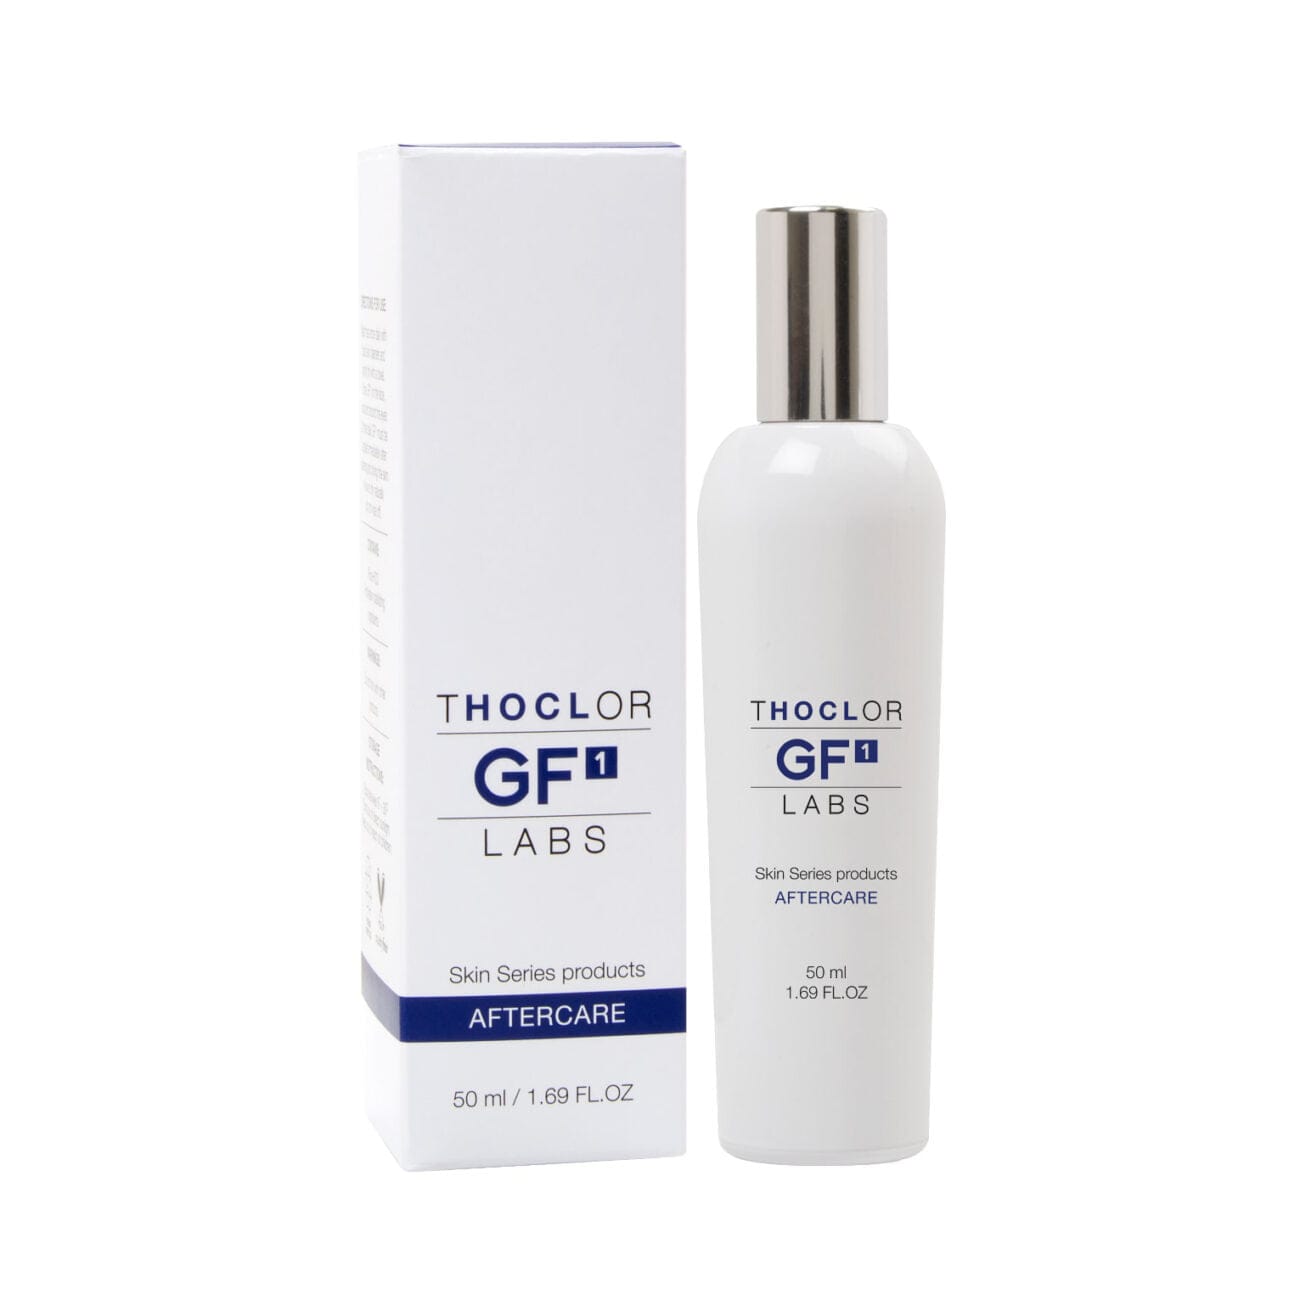 Thoclor GF1 Labs Aftercare